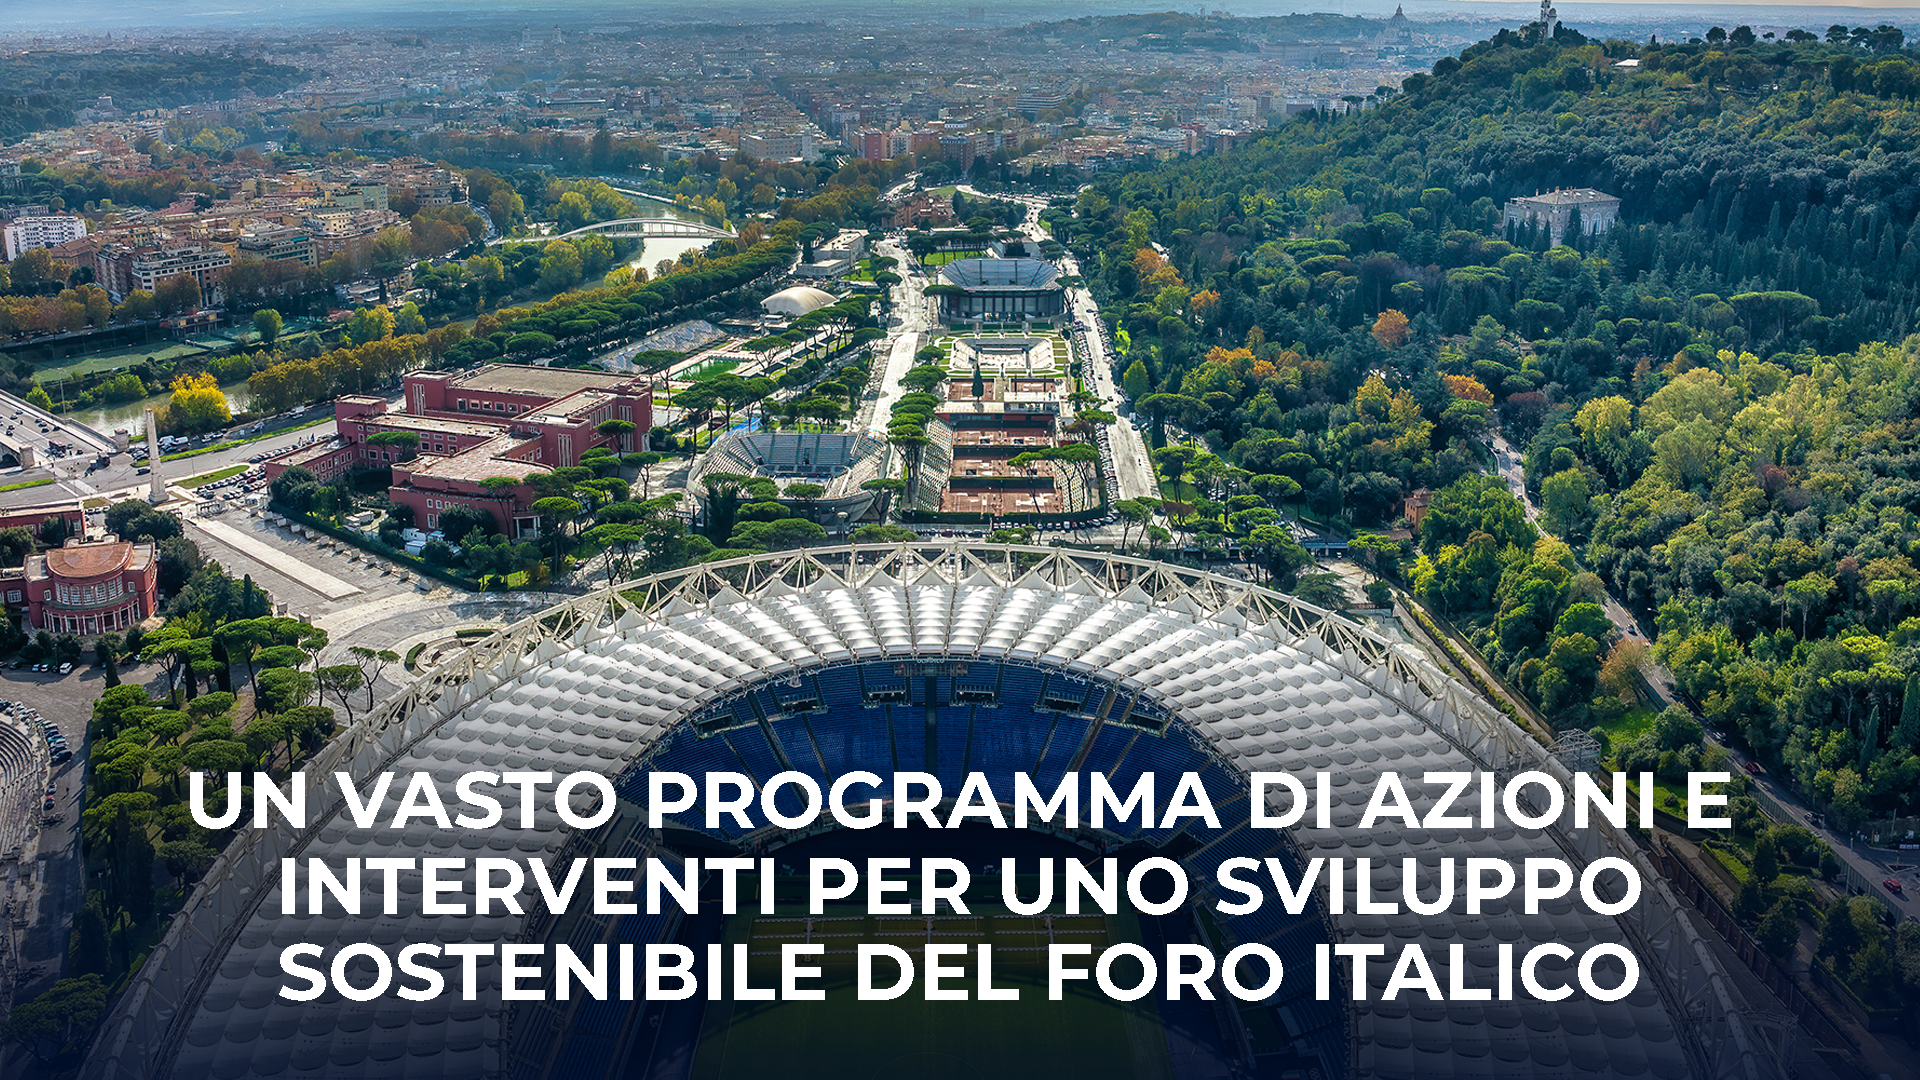 The long season of events at the Foro Italico Park is colored “green”.